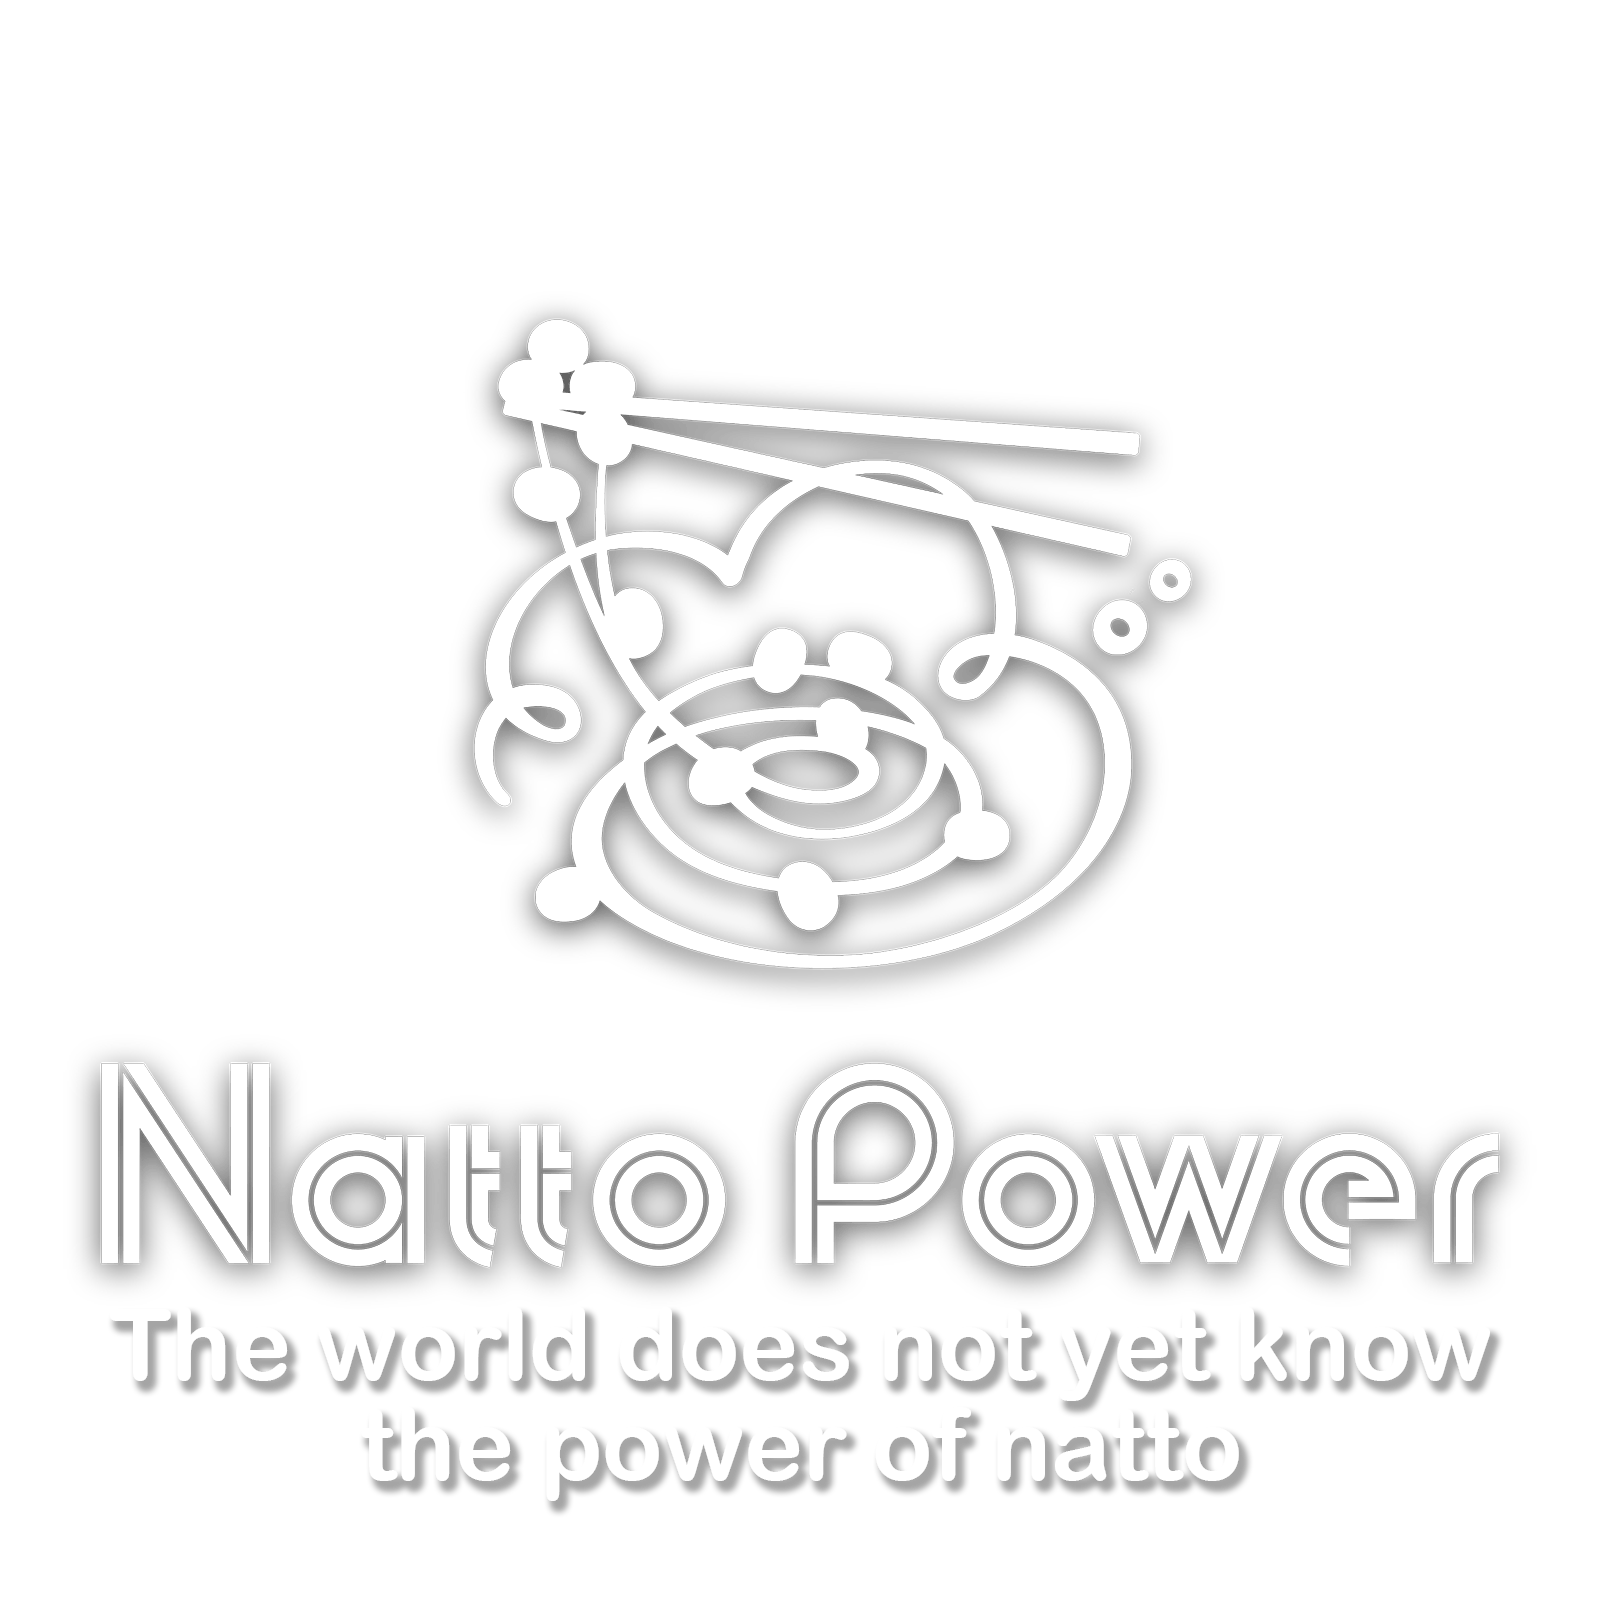 The world does not yet know the power of natto